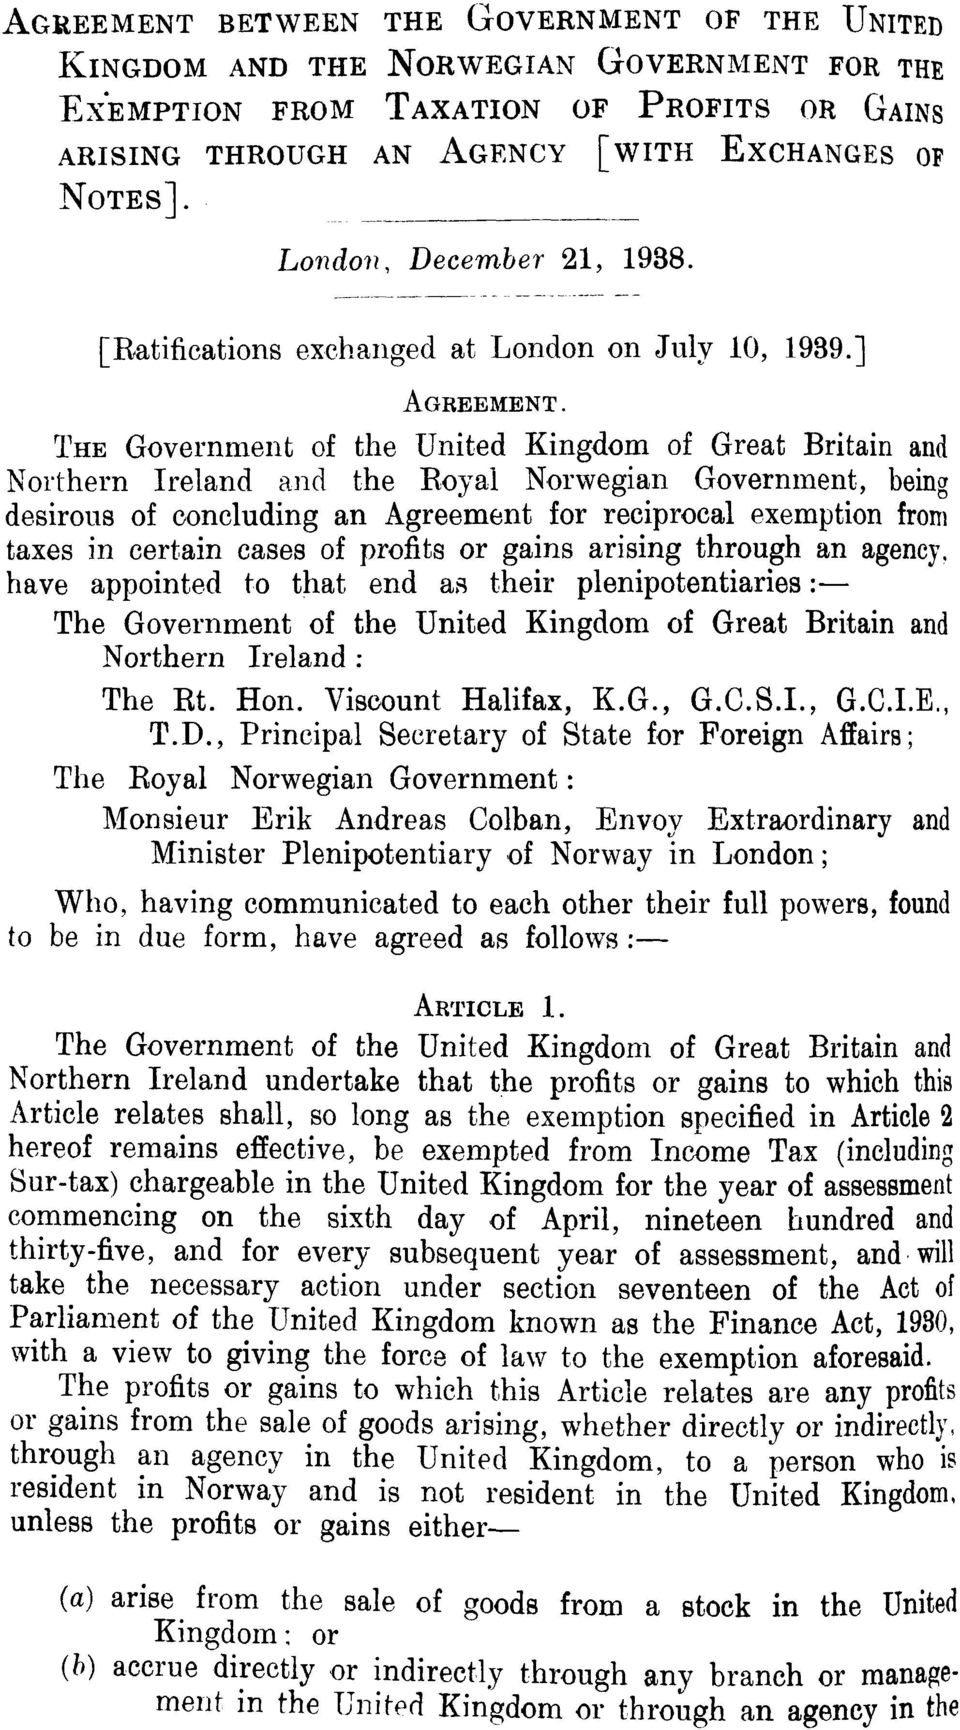 THE Government of the United Kingdom of Great Britain and Northern Ireland and the Royal Norwegian Government, being desirous of concluding an Agreement for reciprocal exemption from taxes in certain